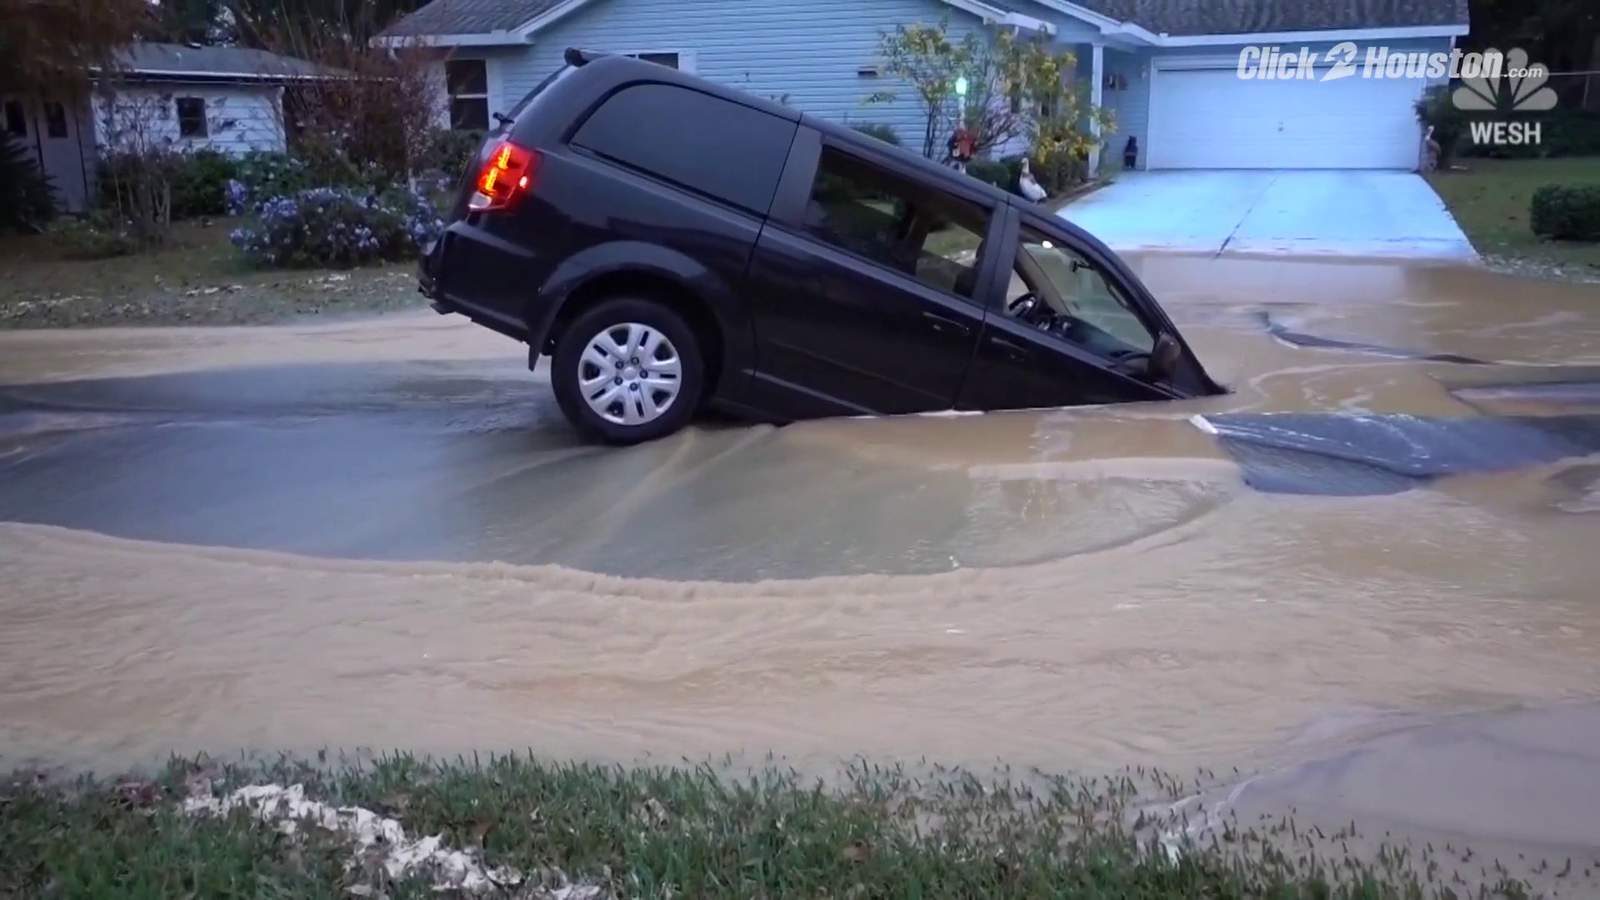 Good Samaritans pull couple from sinking van as it’s swallowed by sinkhole